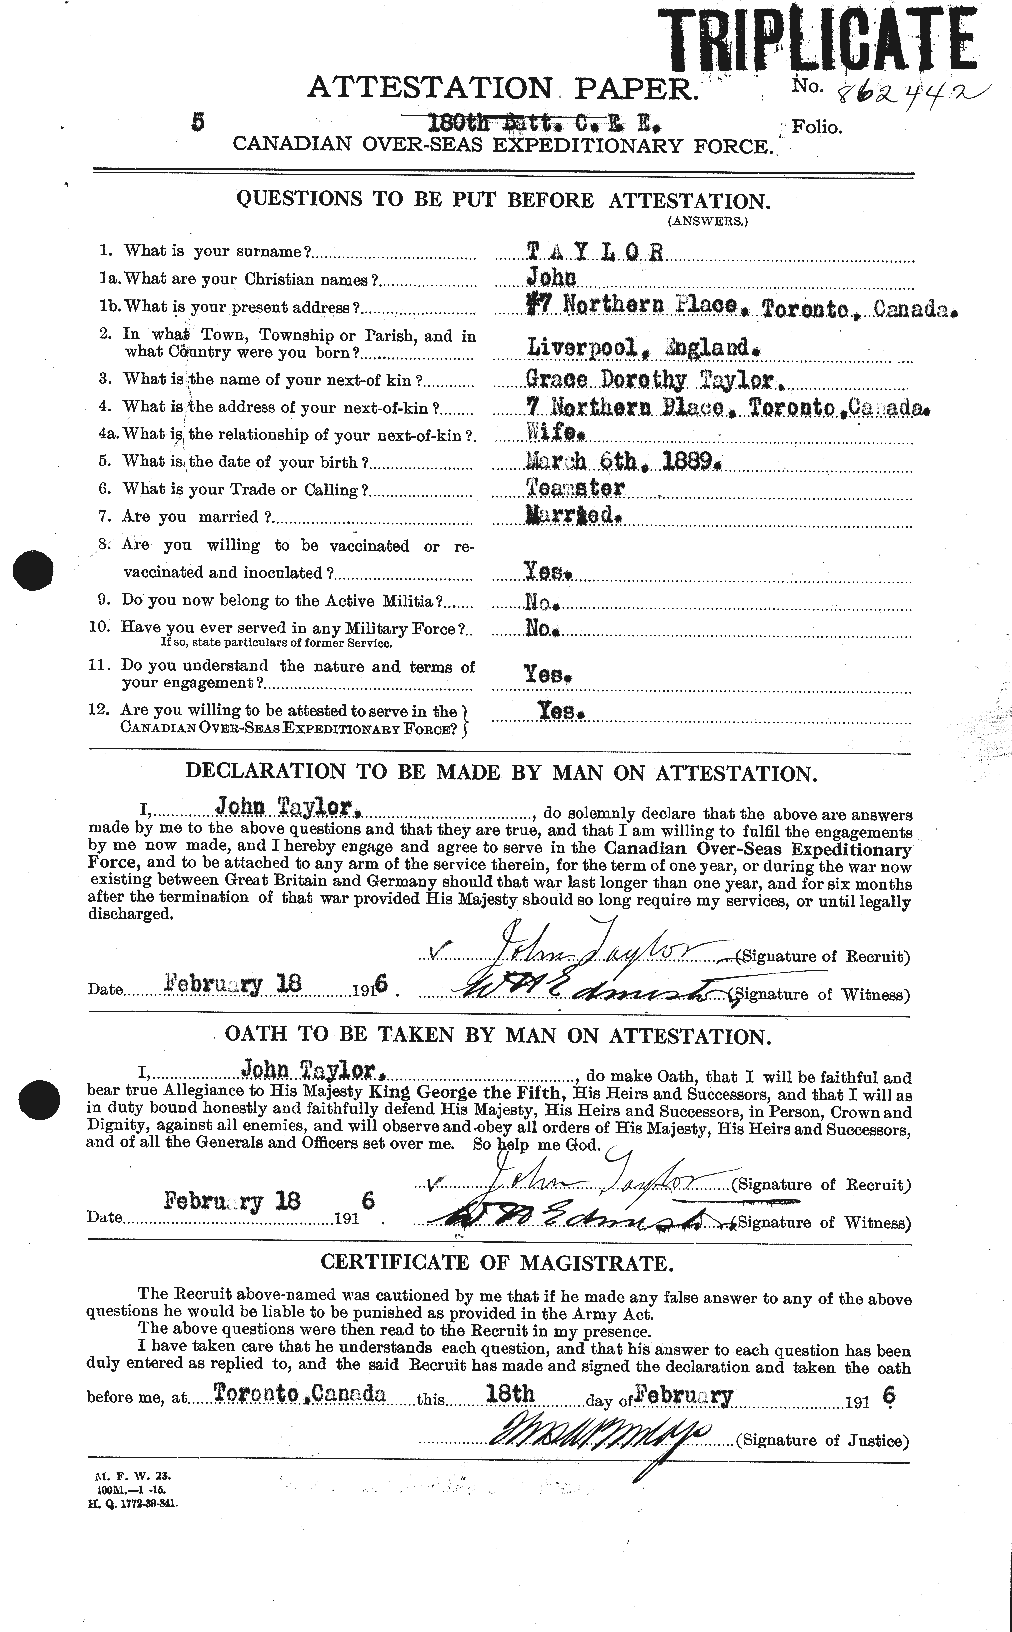 Personnel Records of the First World War - CEF 626984a